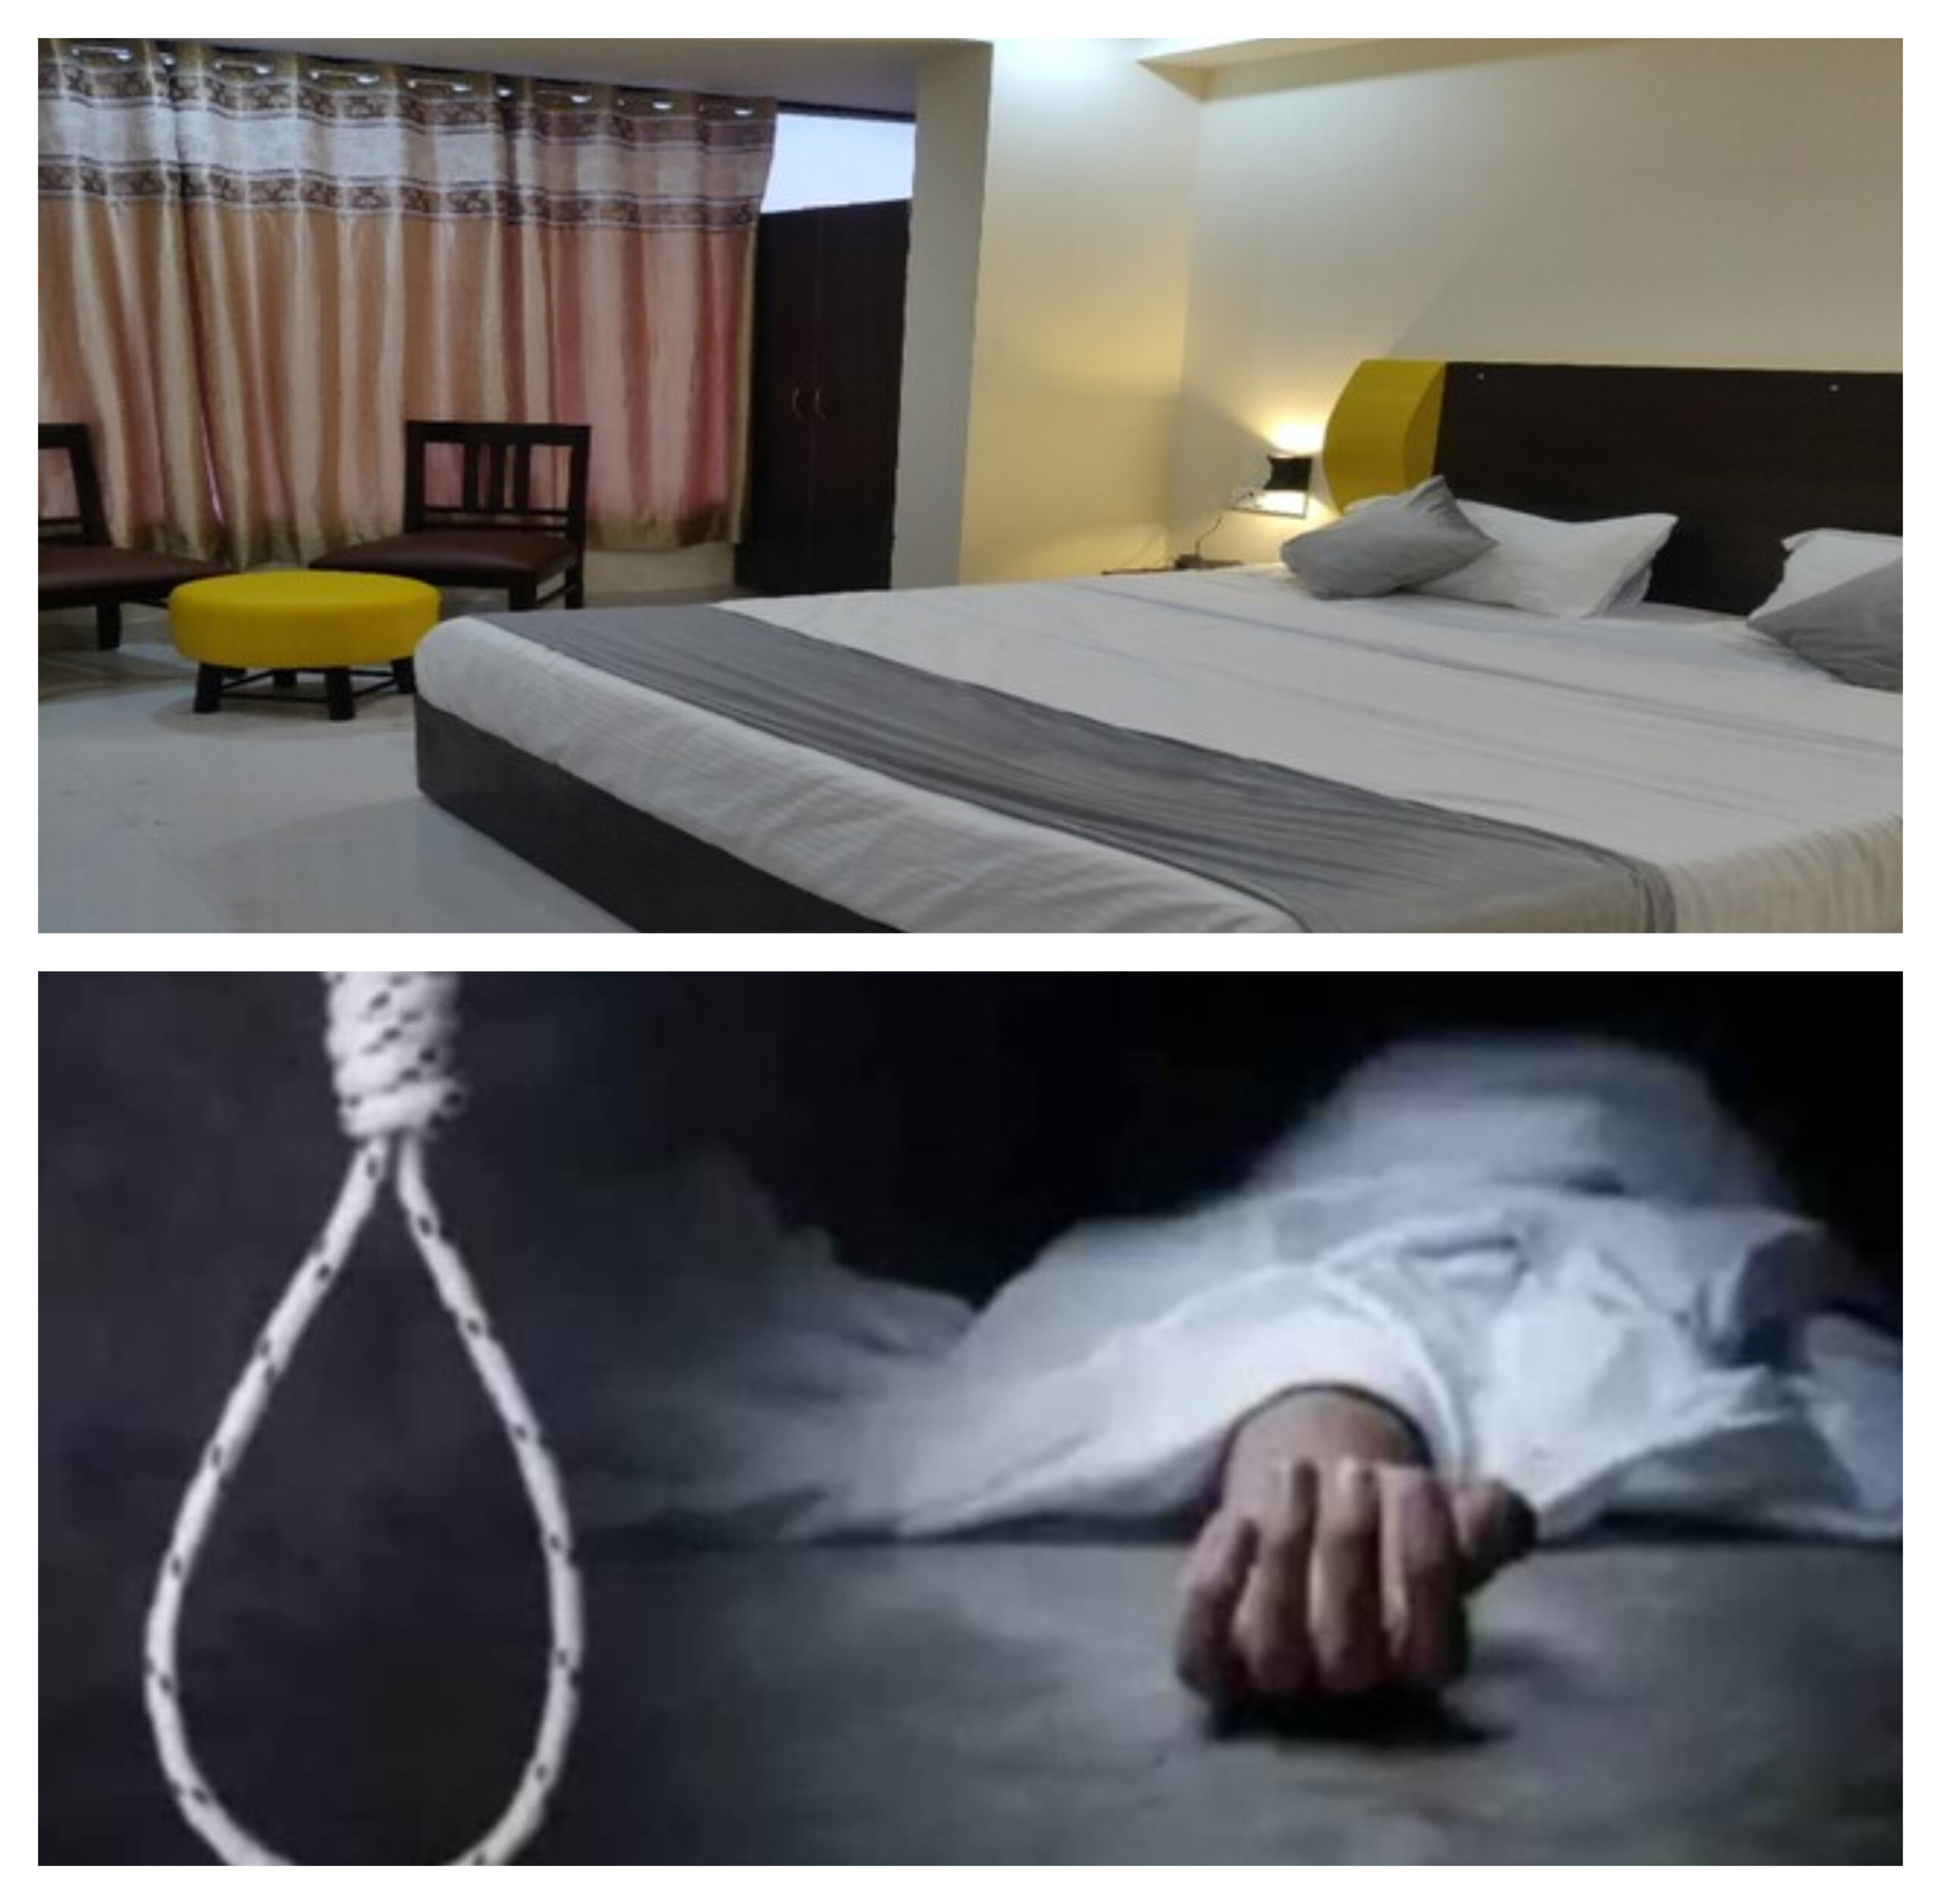 Delhi Crime: A young man left home on the pretext of meeting a friend and reached the hotel, then what happened, delhi crime news in hindi